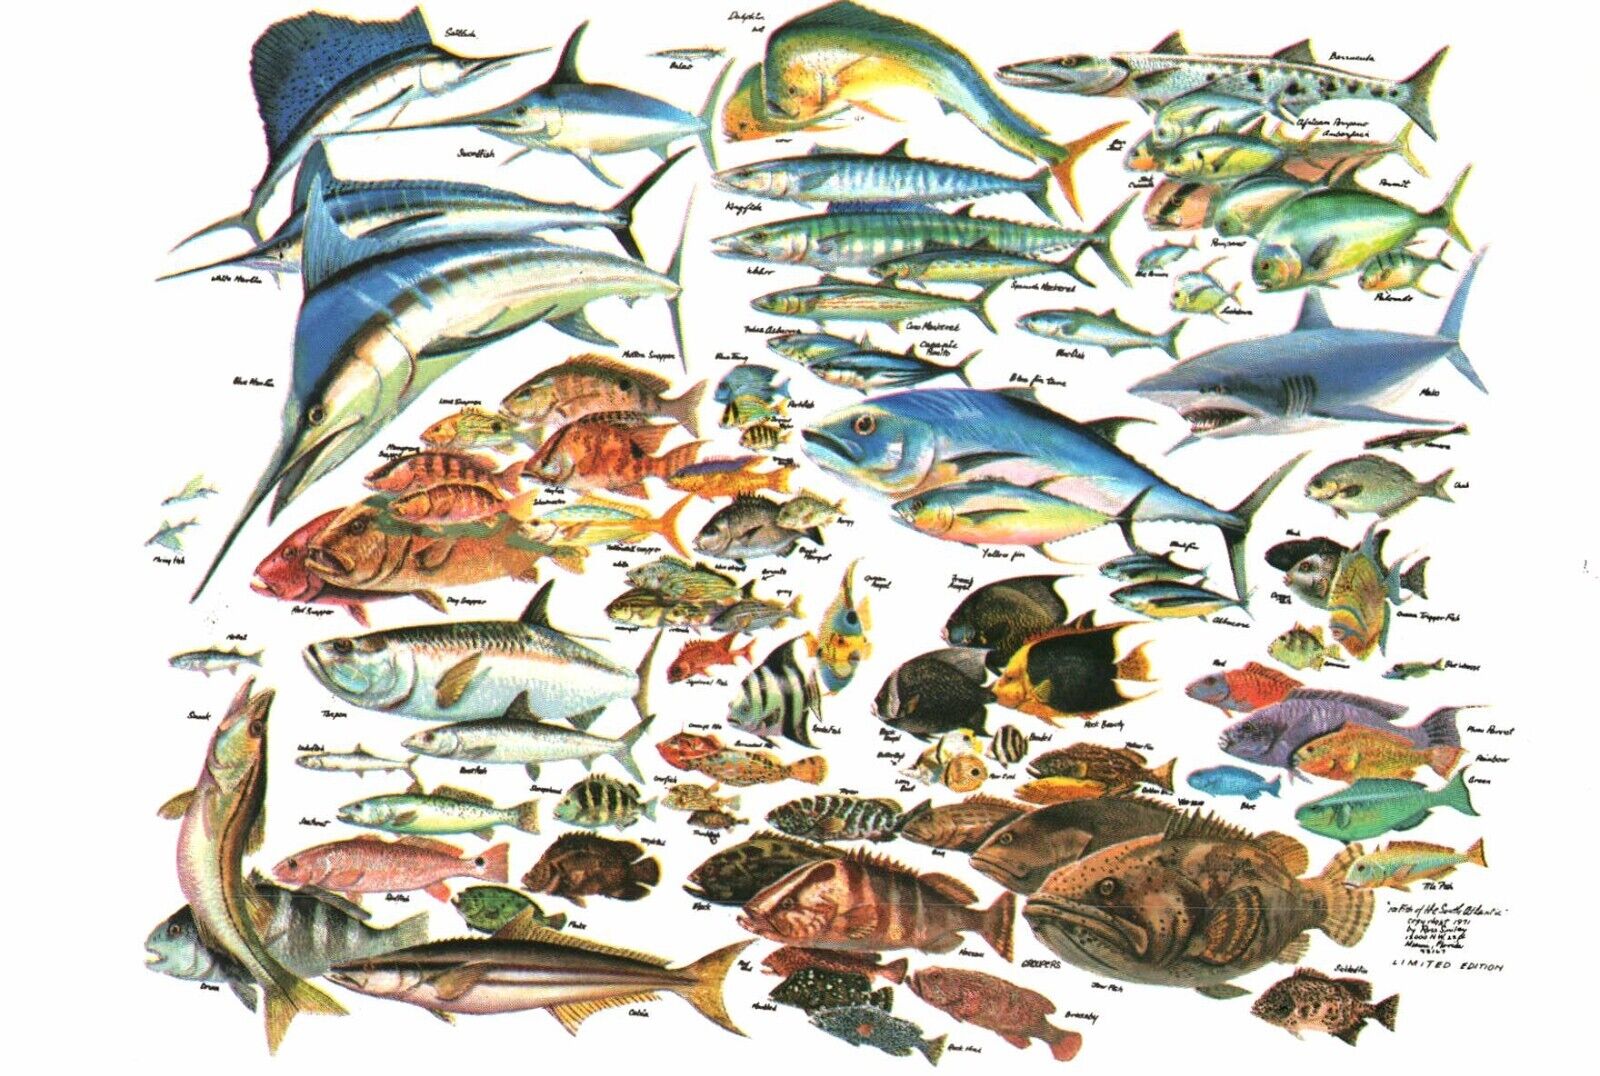 Florida Coast 101 Fish of the South Atlantic Painting by Russ Smiley Postcard